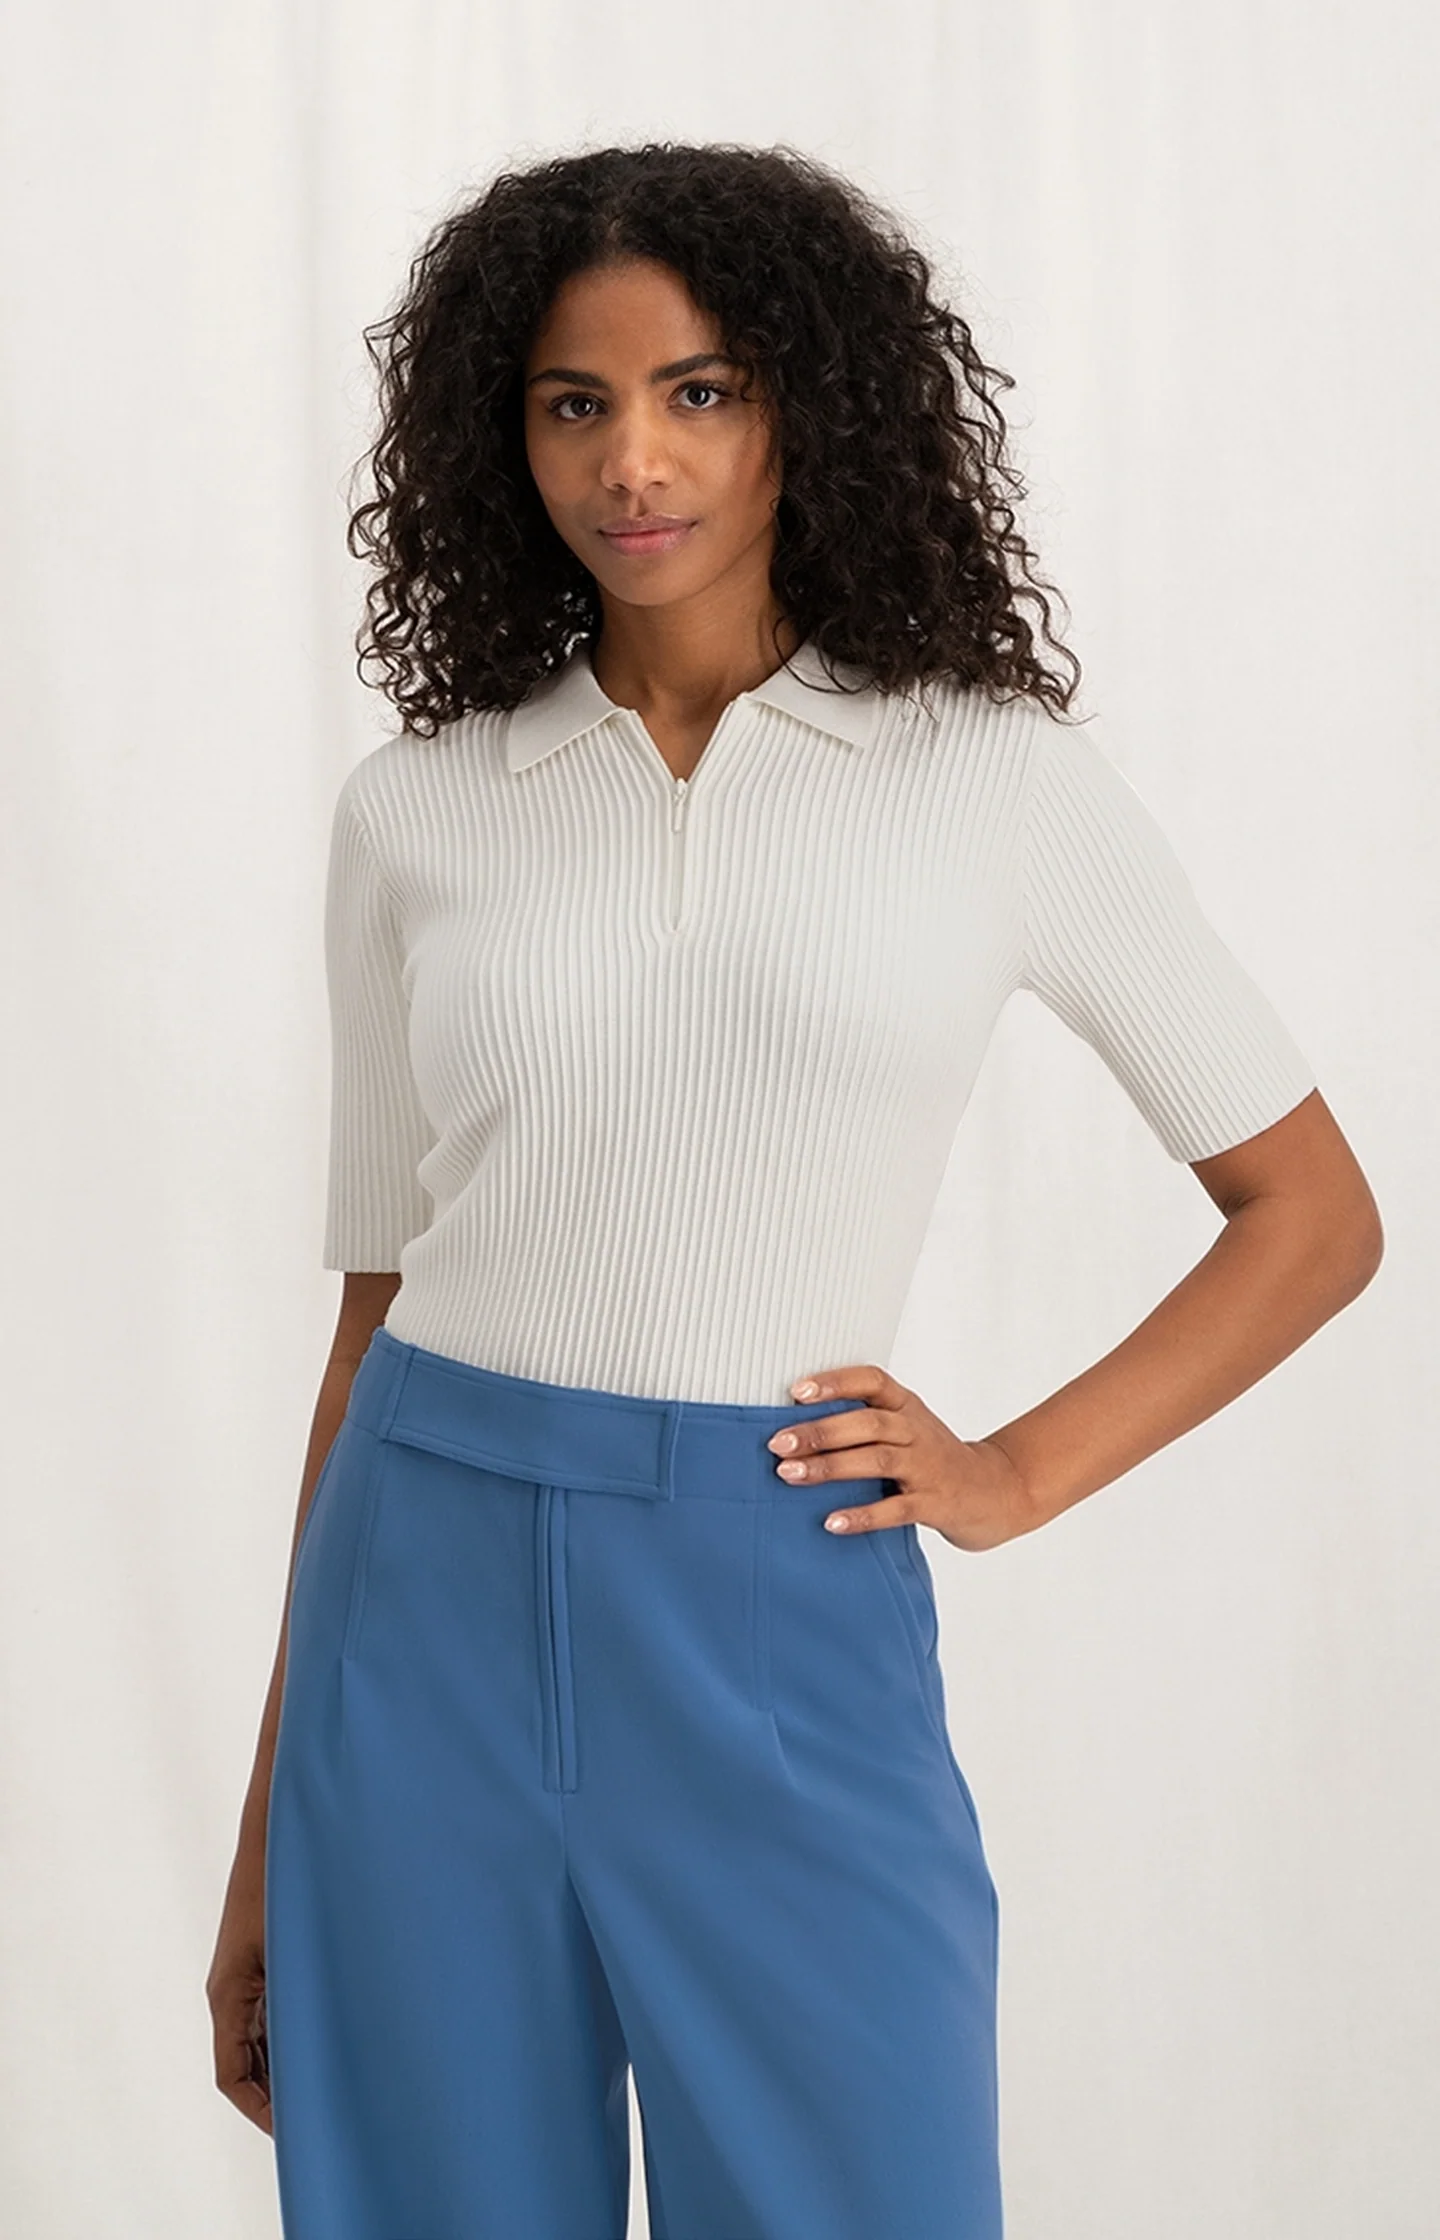 ribbed-polo-with-a-collar-half-long-sleeves-and-a-zip-ivory-white_2880x.jpg